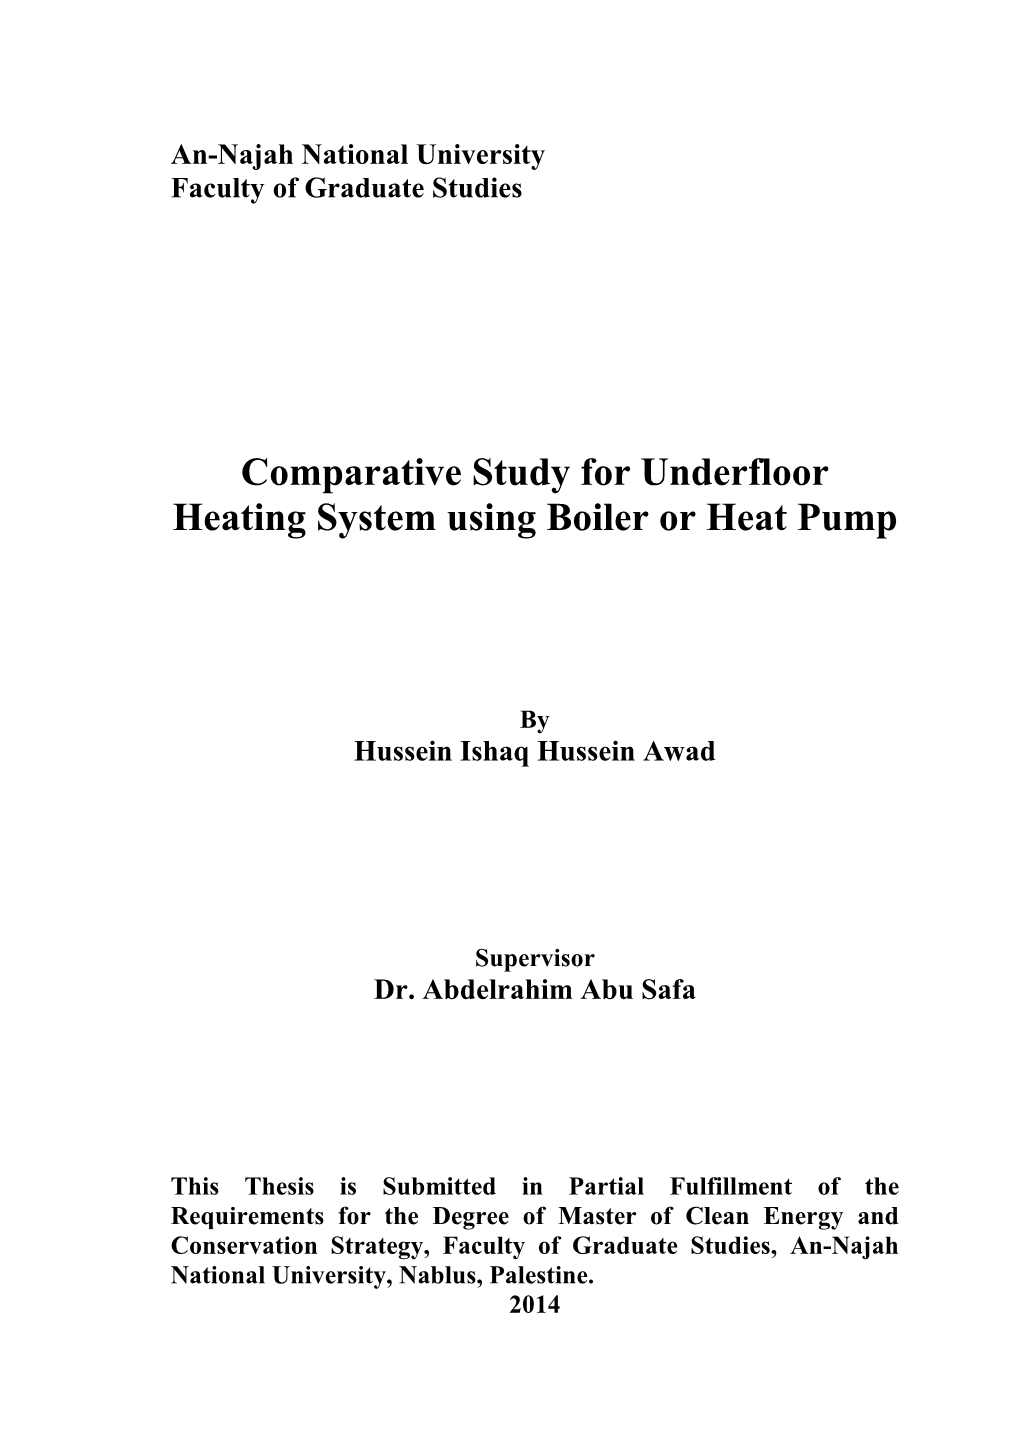 Comparative Study for Underfloor Heating System Using Boiler Or Heat Pump